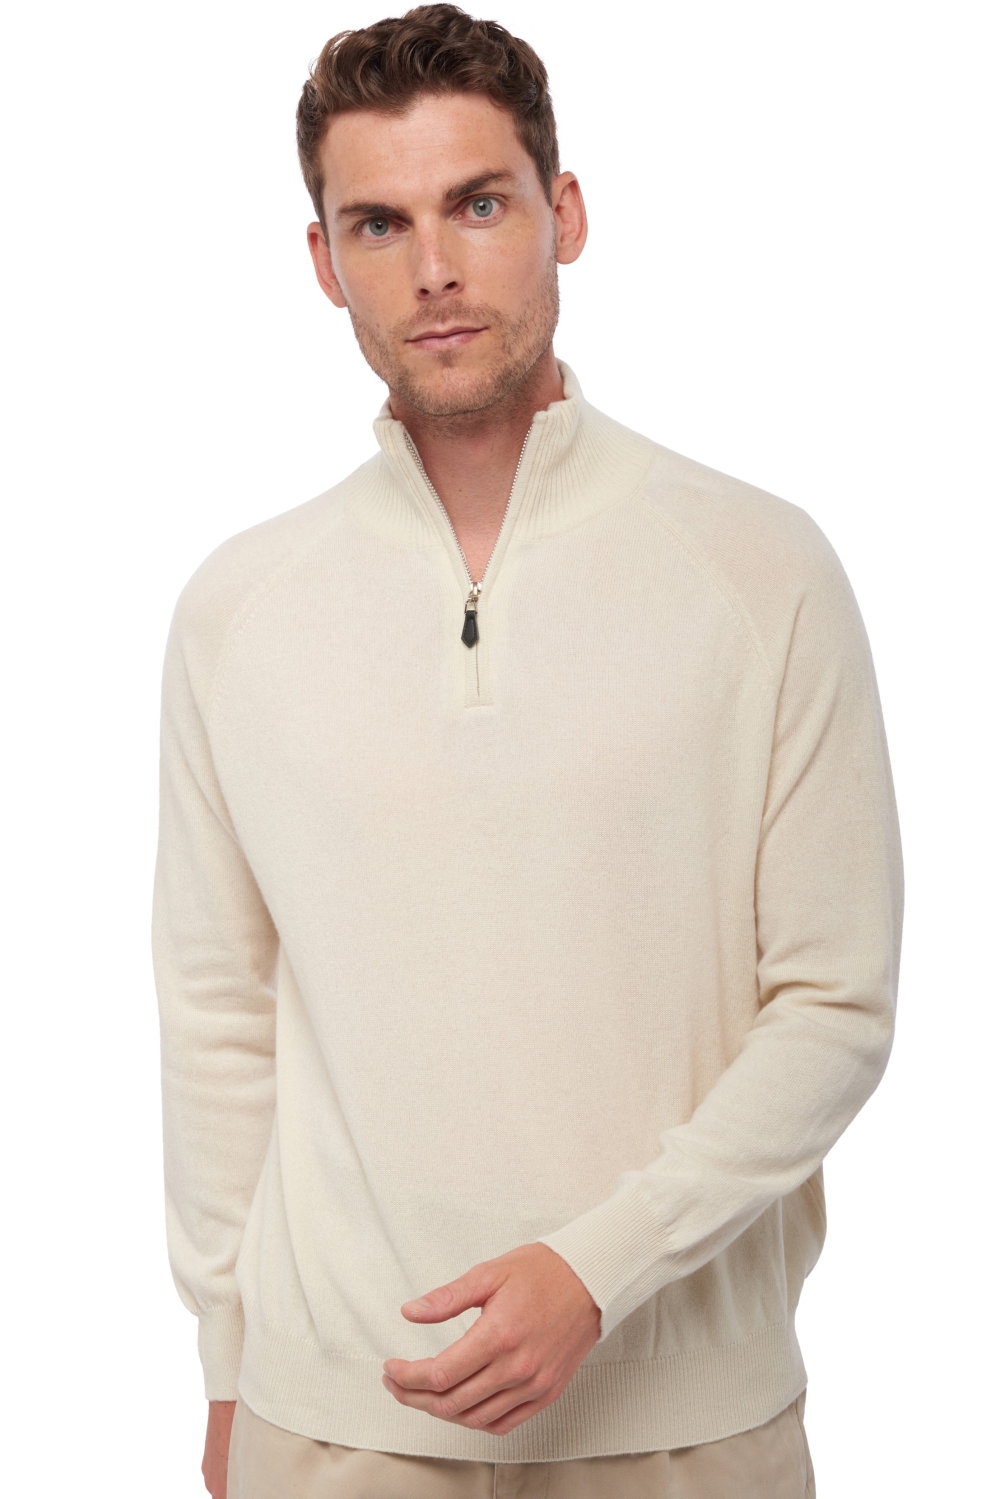 Cachemire pull homme natural vez natural ecru s